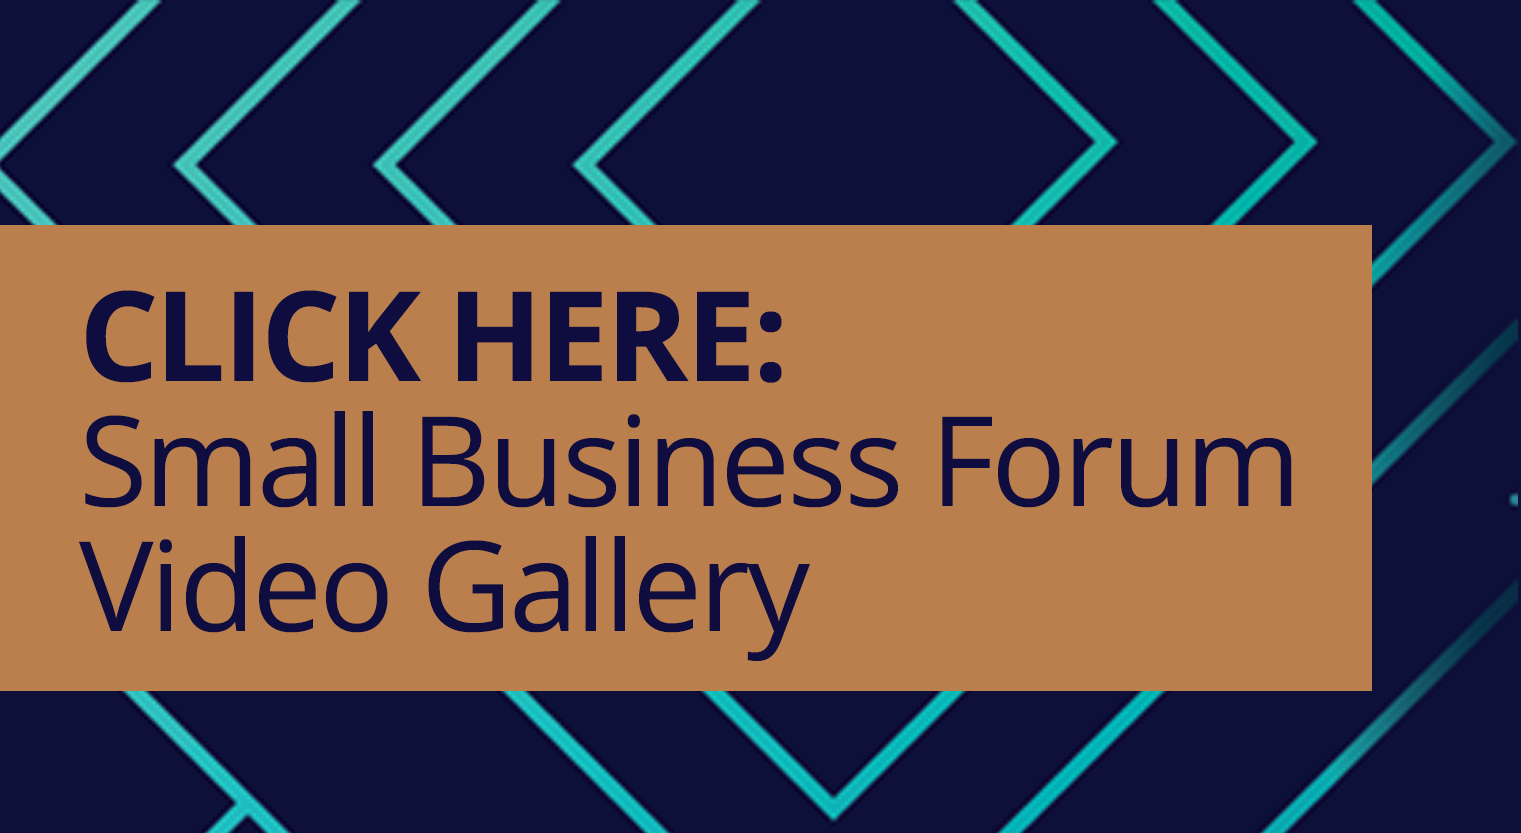 Small business forum video gallery thumbnail